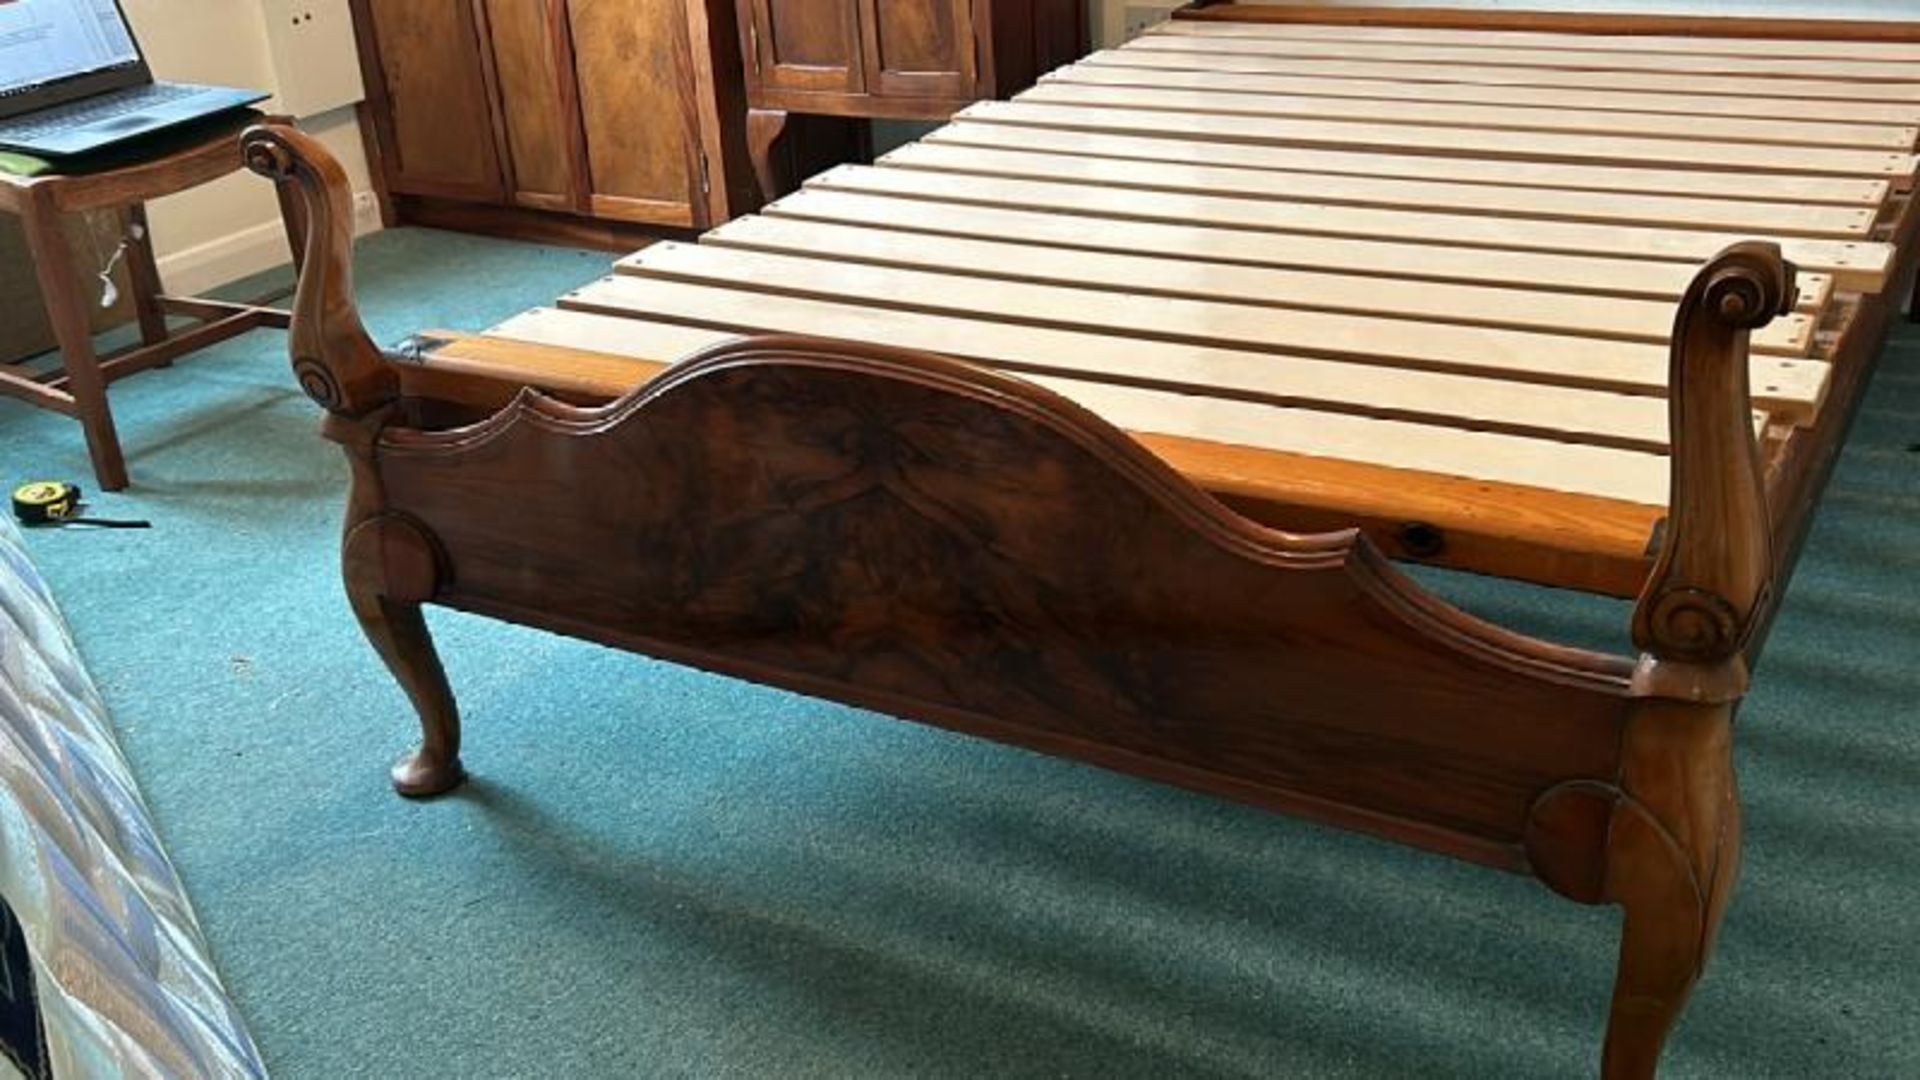 Walnut bedframe, with scalloped head rest carved finials and wooden slats, total Lenth 203cm, - Image 14 of 16